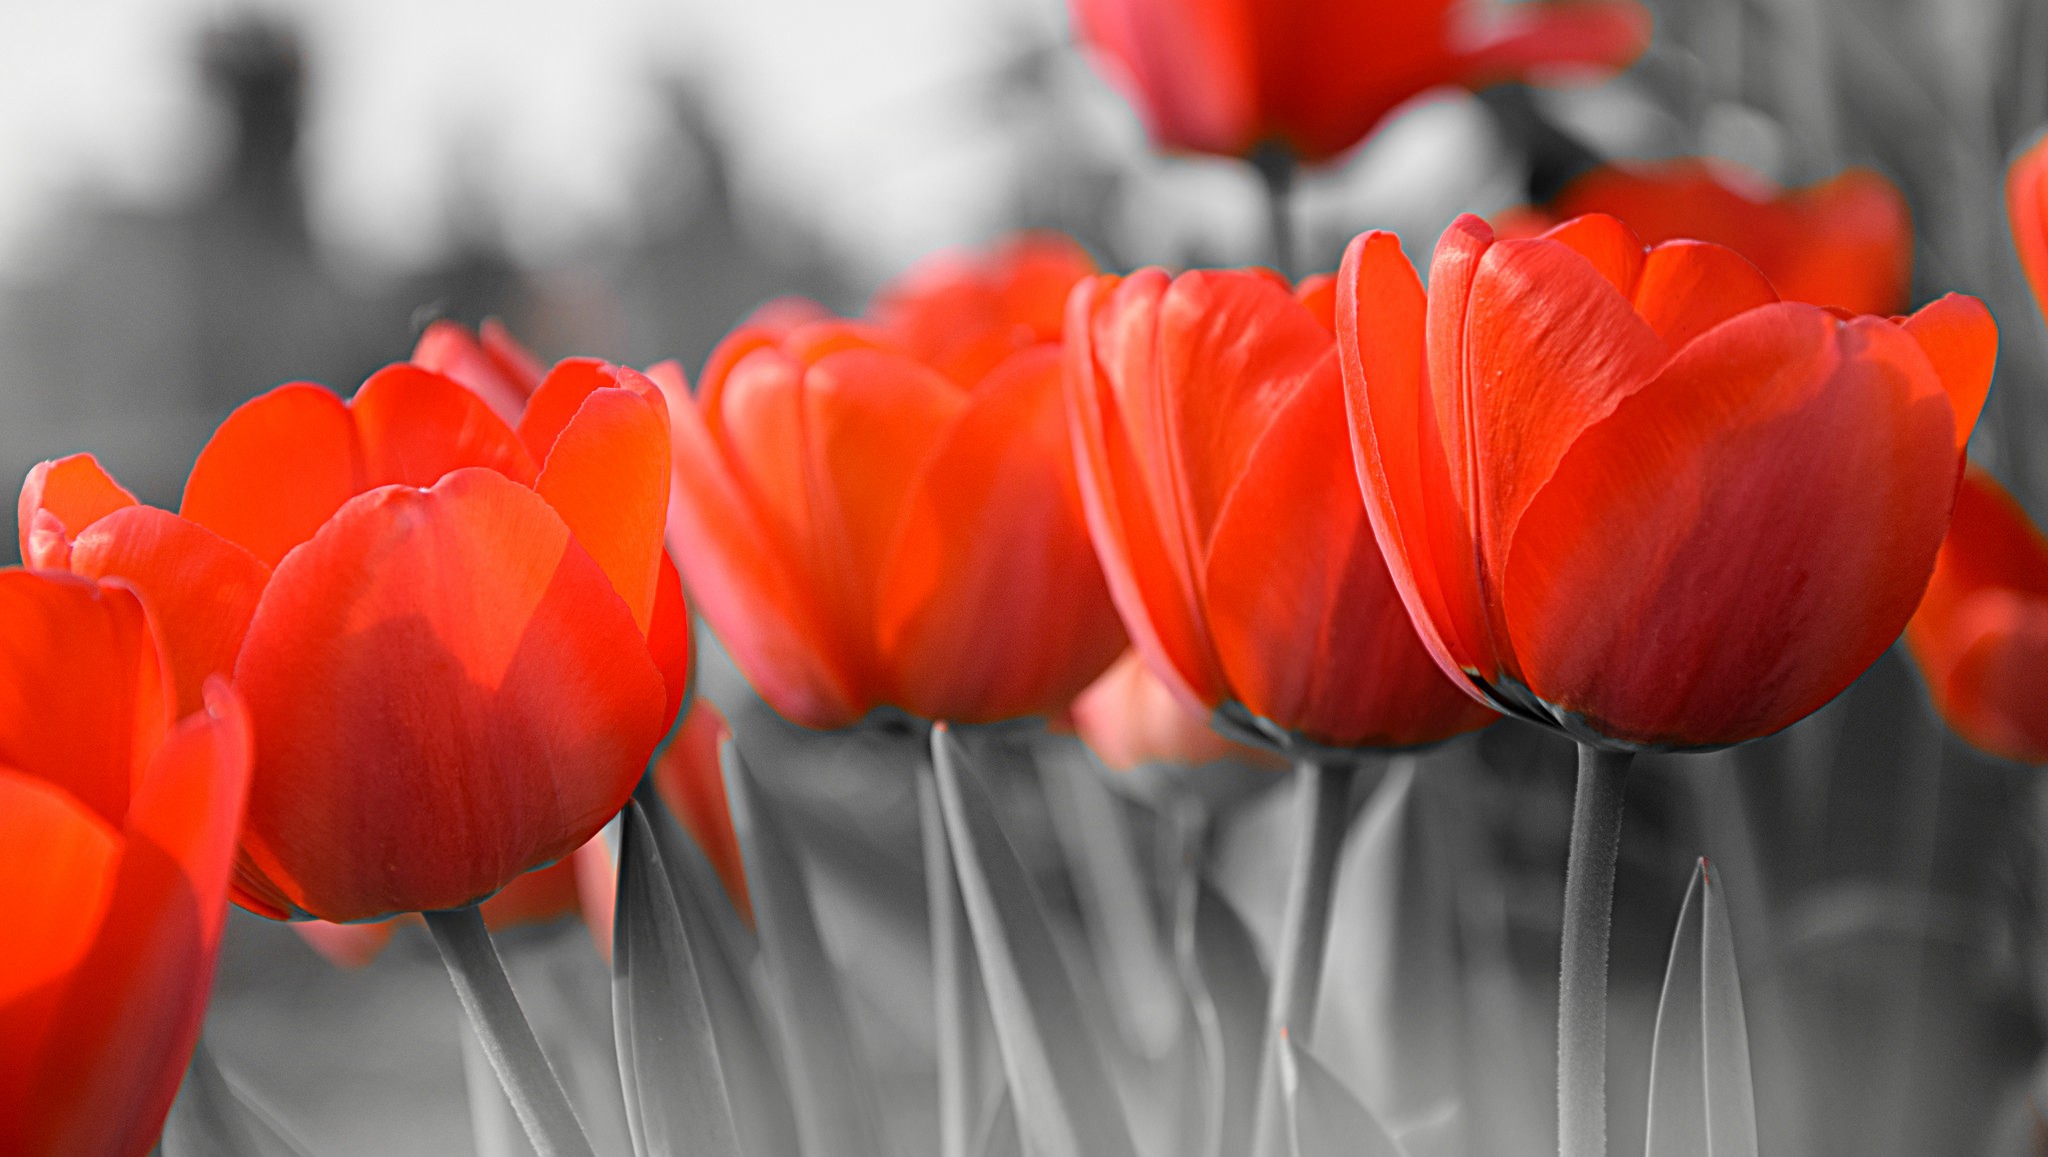 General 2048x1157 flowers tulips selective coloring closeup red flowers plants outdoors